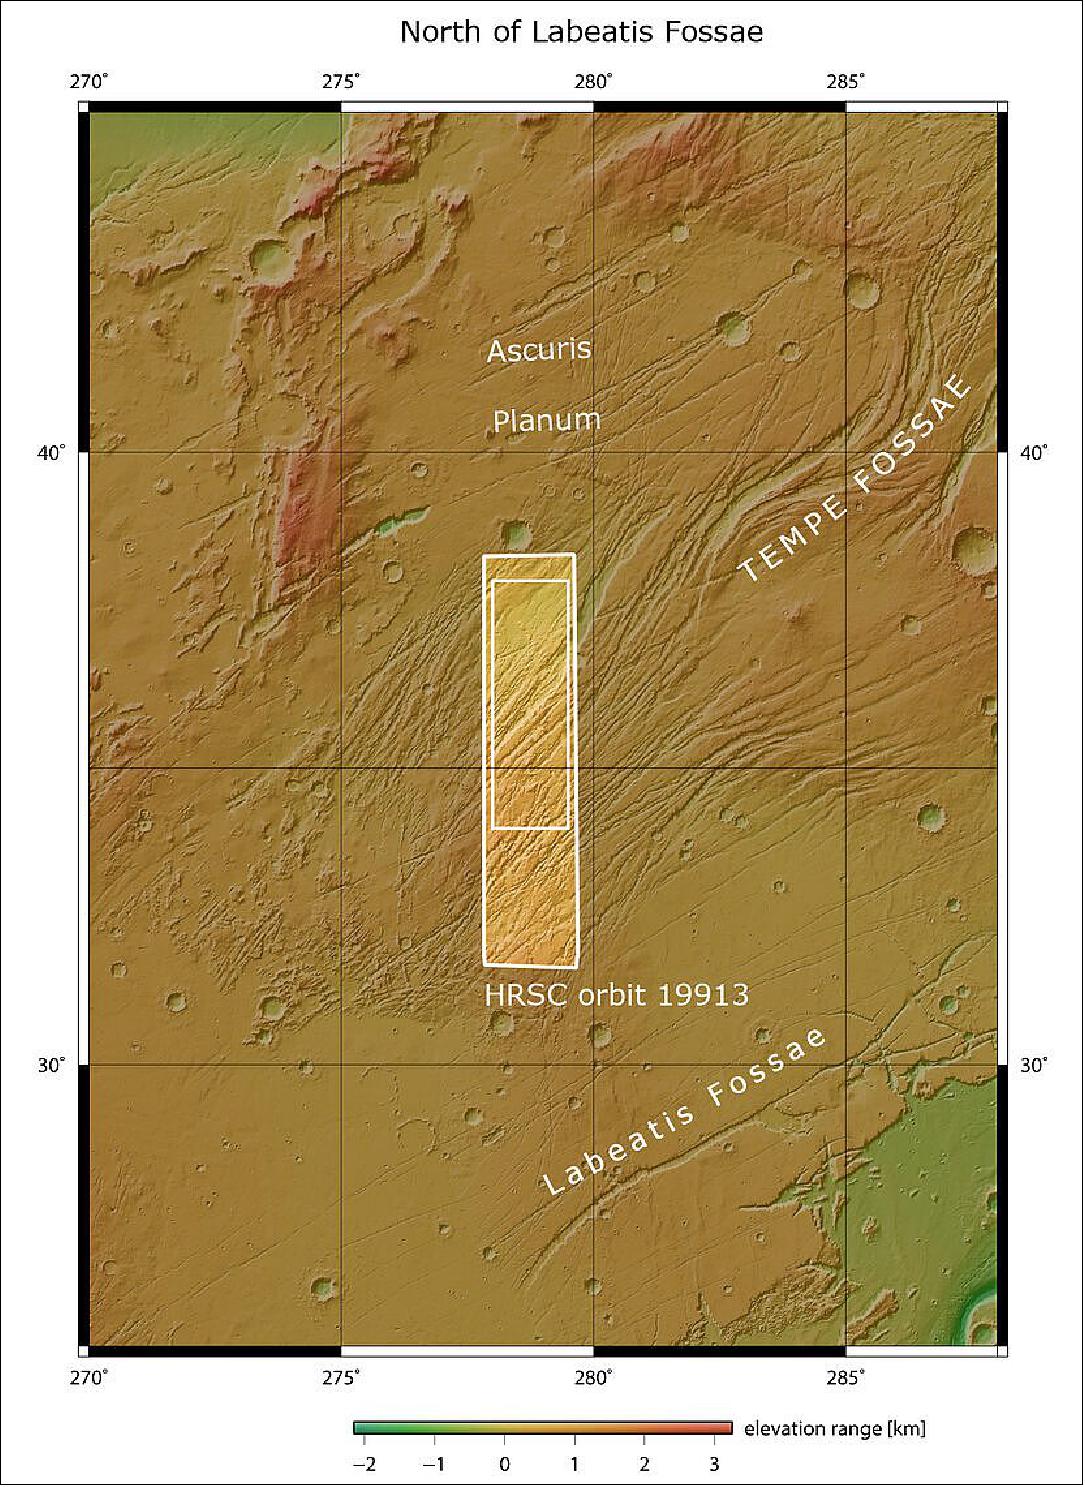 Figure 92: This image shows part of Mars’ surface, located northeast of the Tharsis volcanic province, in a wider context. This is Tempe Fossae – a series of tectonic faults that cuts across Tempe Terra in Mars’ northern highlands. The area outlined by the bold white box indicates the area imaged by the Mars Express High Resolution Stereo Camera on 30 September 2019 during orbit 19913 (image credit: NASA MGS MOLA Science Team)